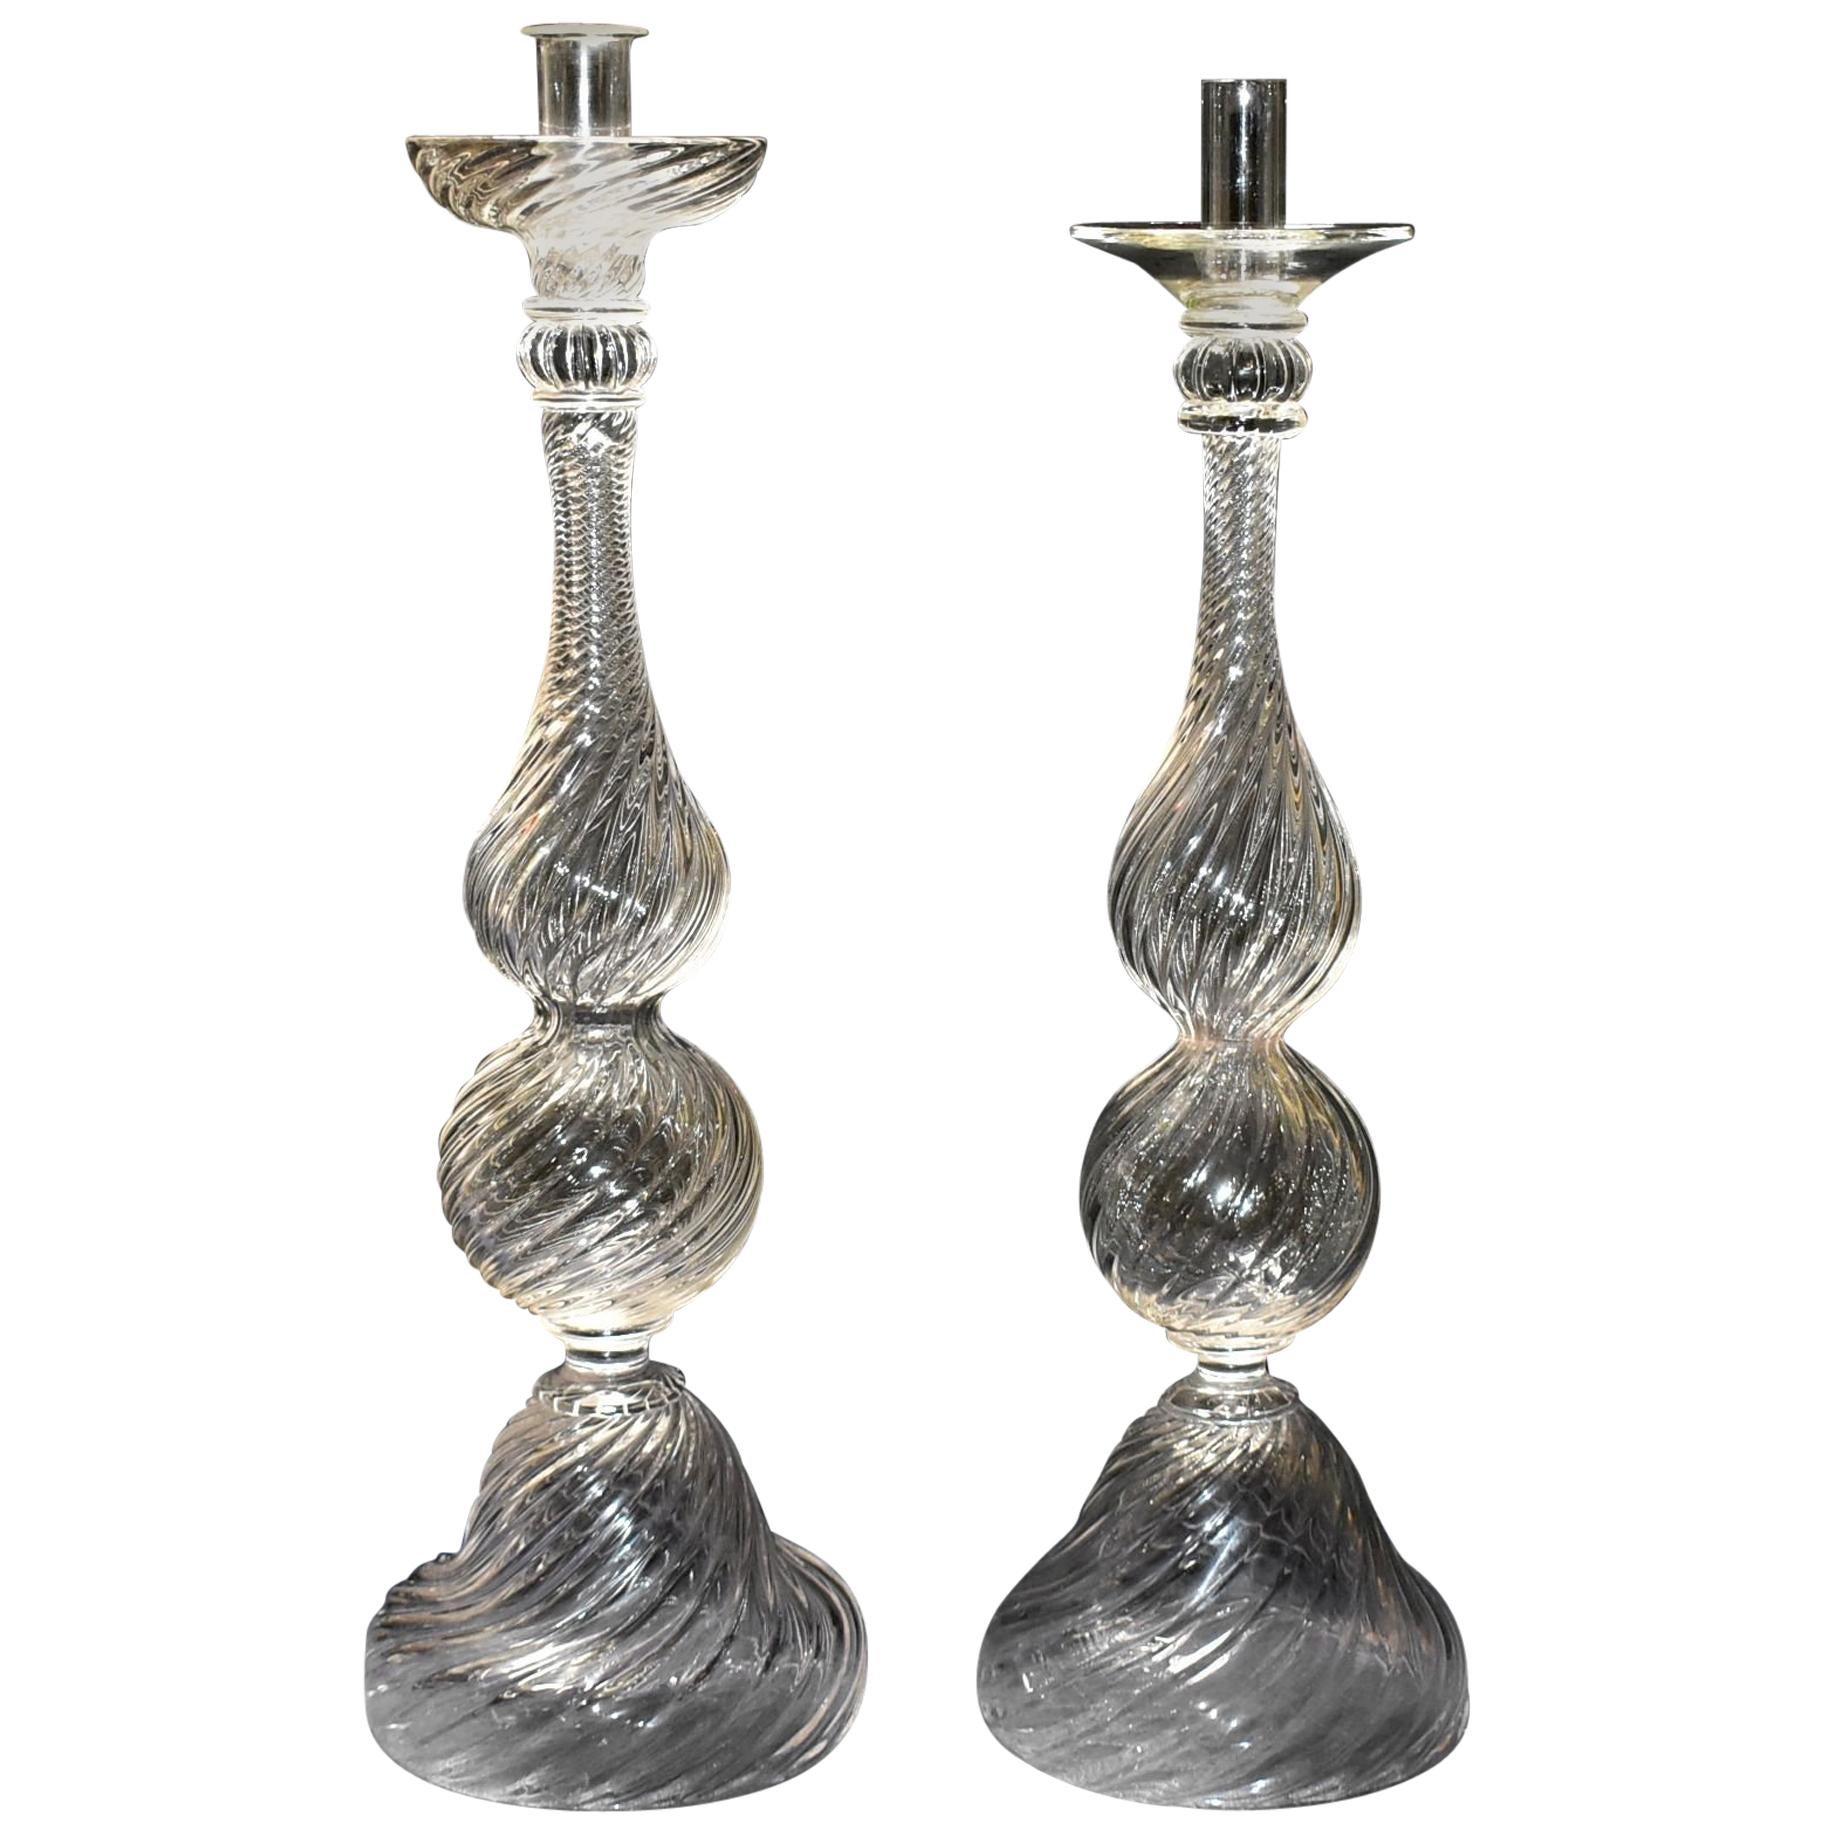 Two Tall Signed Seguso Handblown Glass Candlesticks For Sale